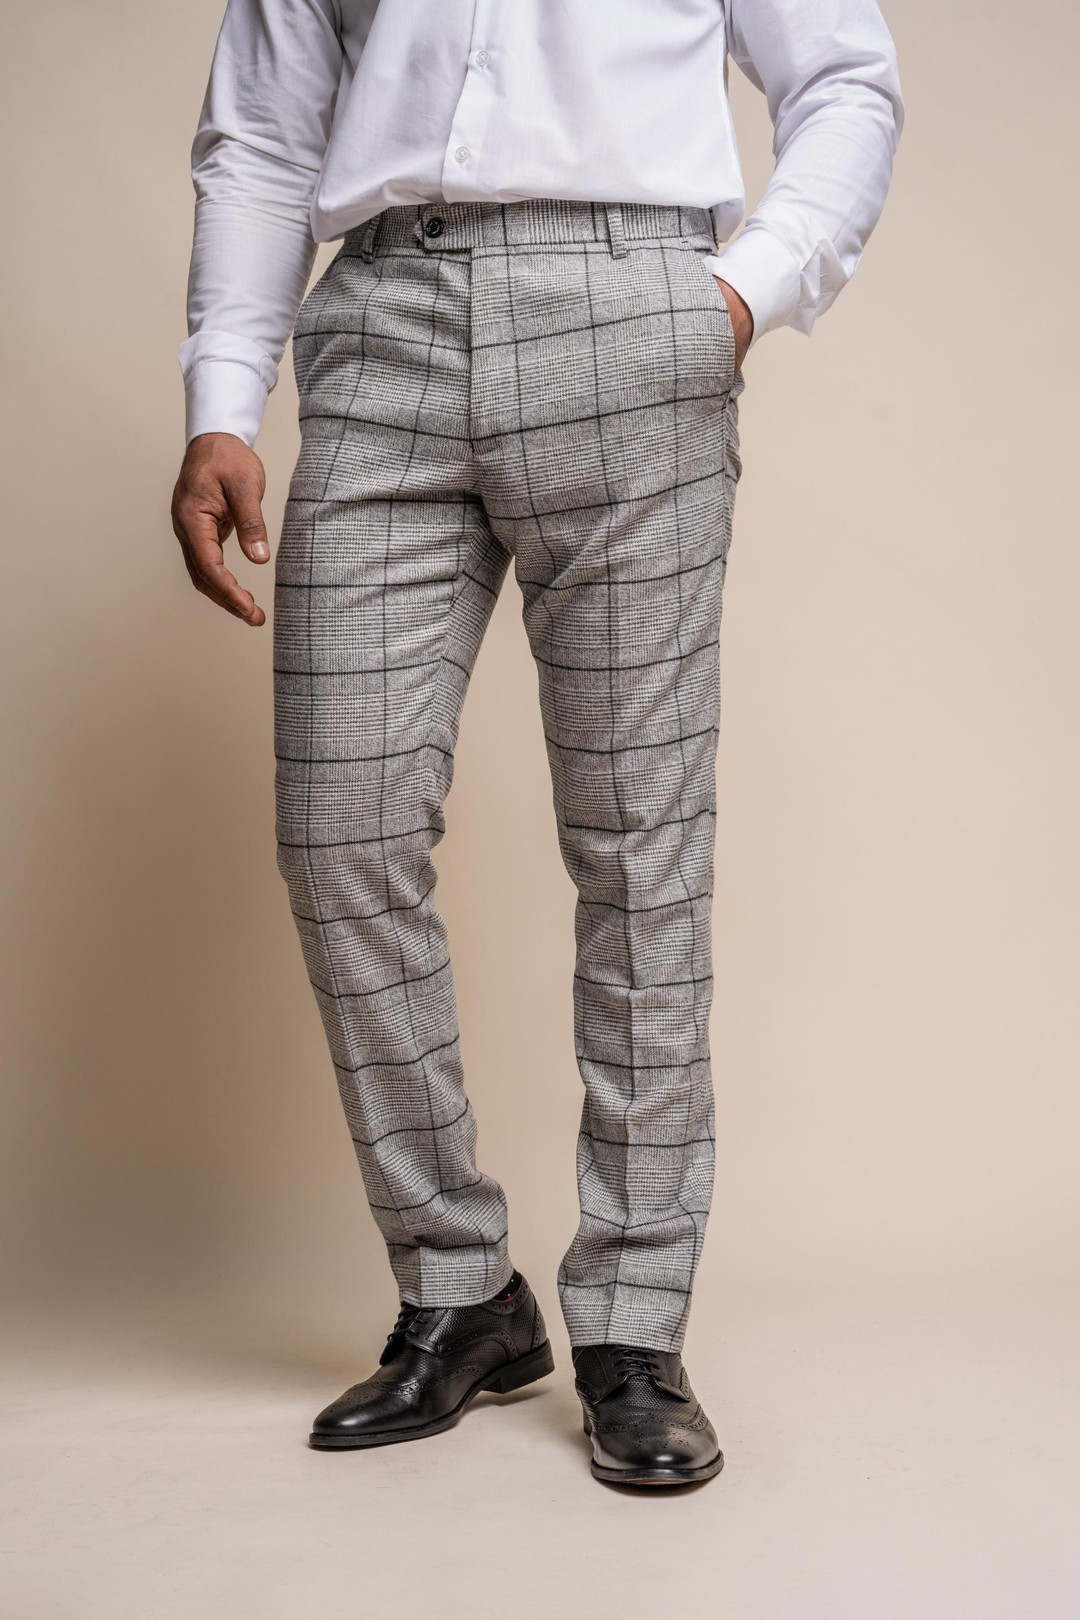 Formal Wear Pure Cotton Fabric Check Pattern Regular Fit Men's Pleated  Trousers at Best Price in Ludhiana | Bhatia Collection